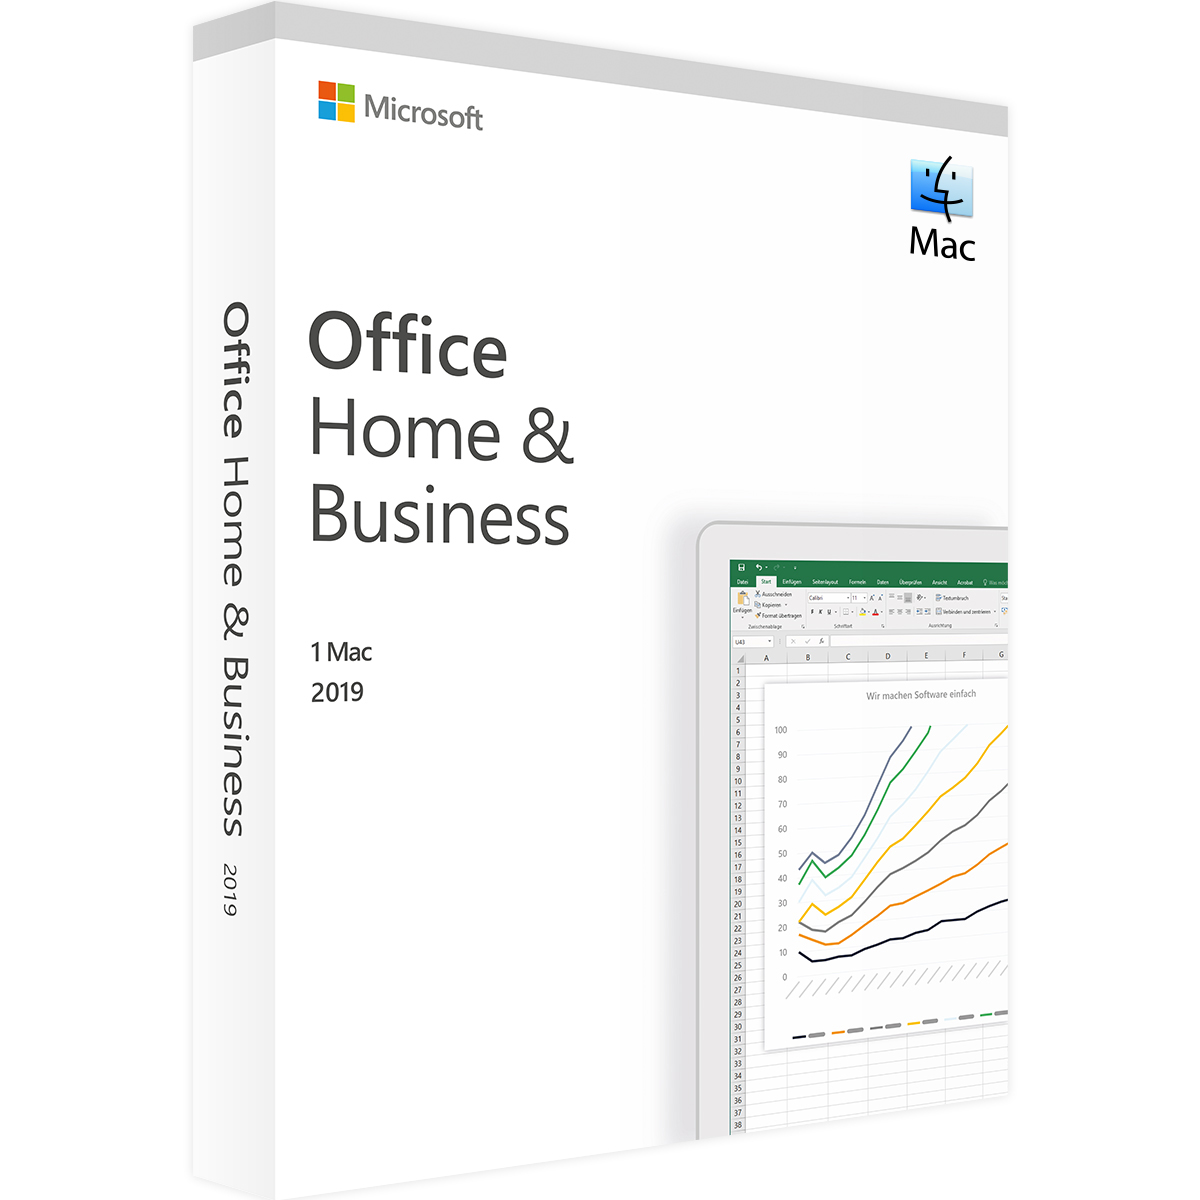 Office 2019 Home & Business for Mac